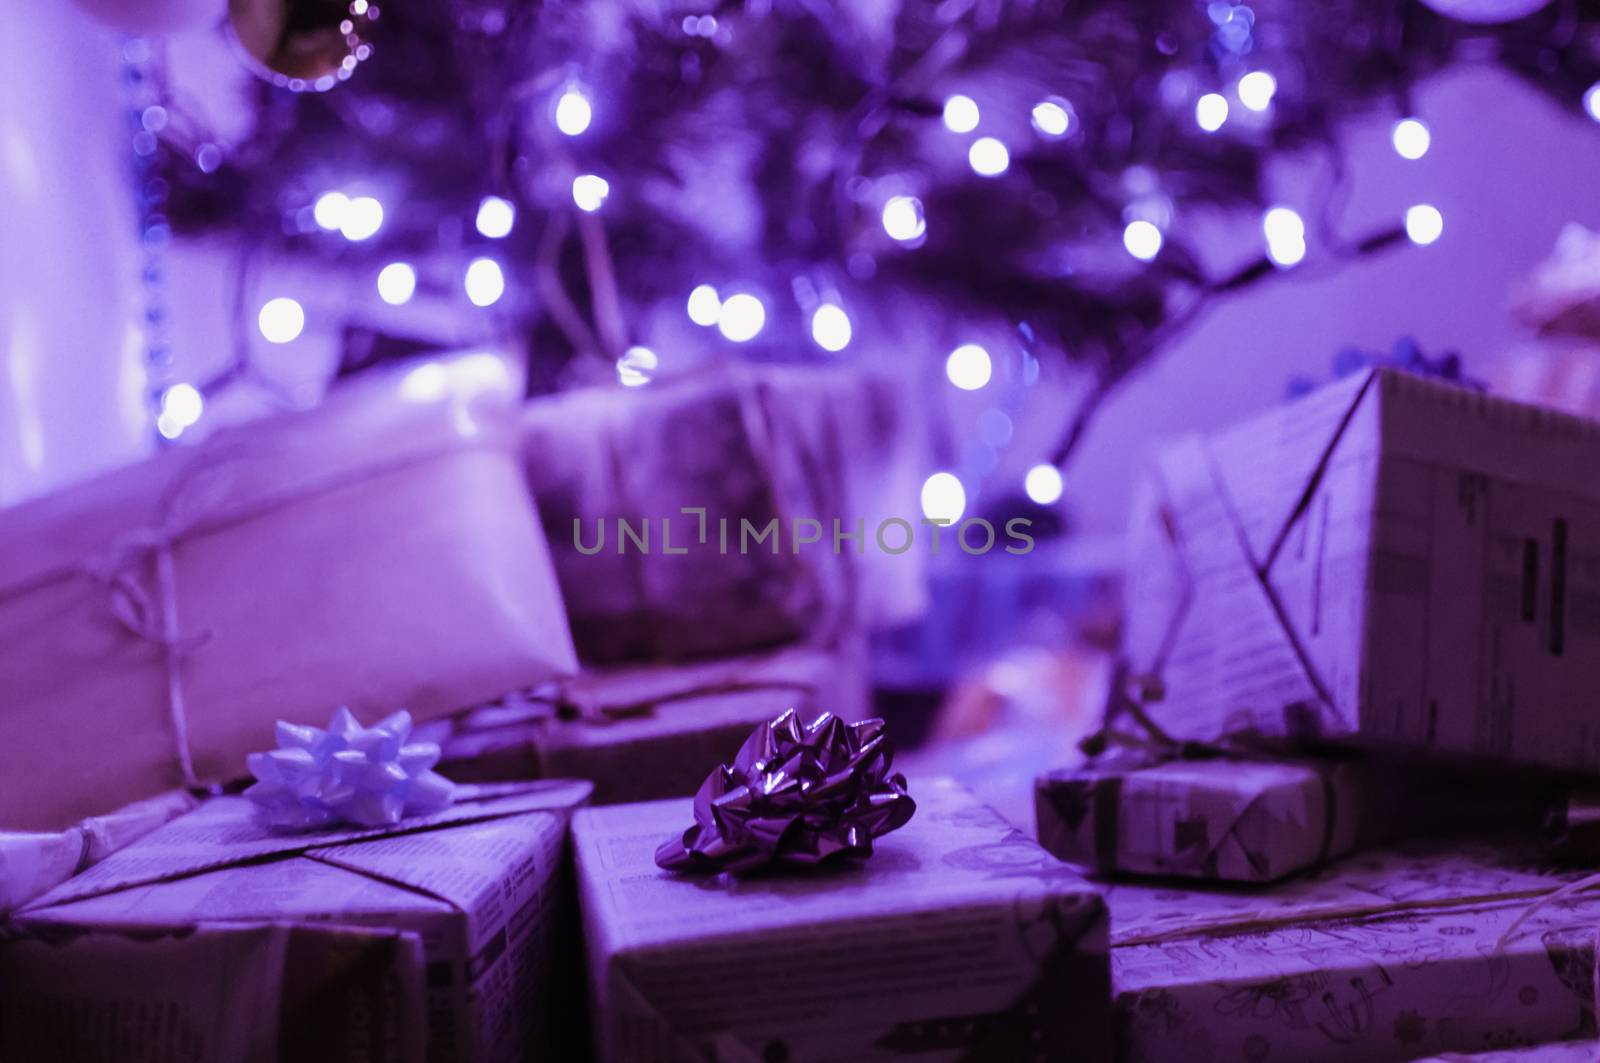 gifts packed in boxes and wrapped with festive paper with bows lie under a Christmas tree in neon light from an LED garland. The concept of winter holidays.